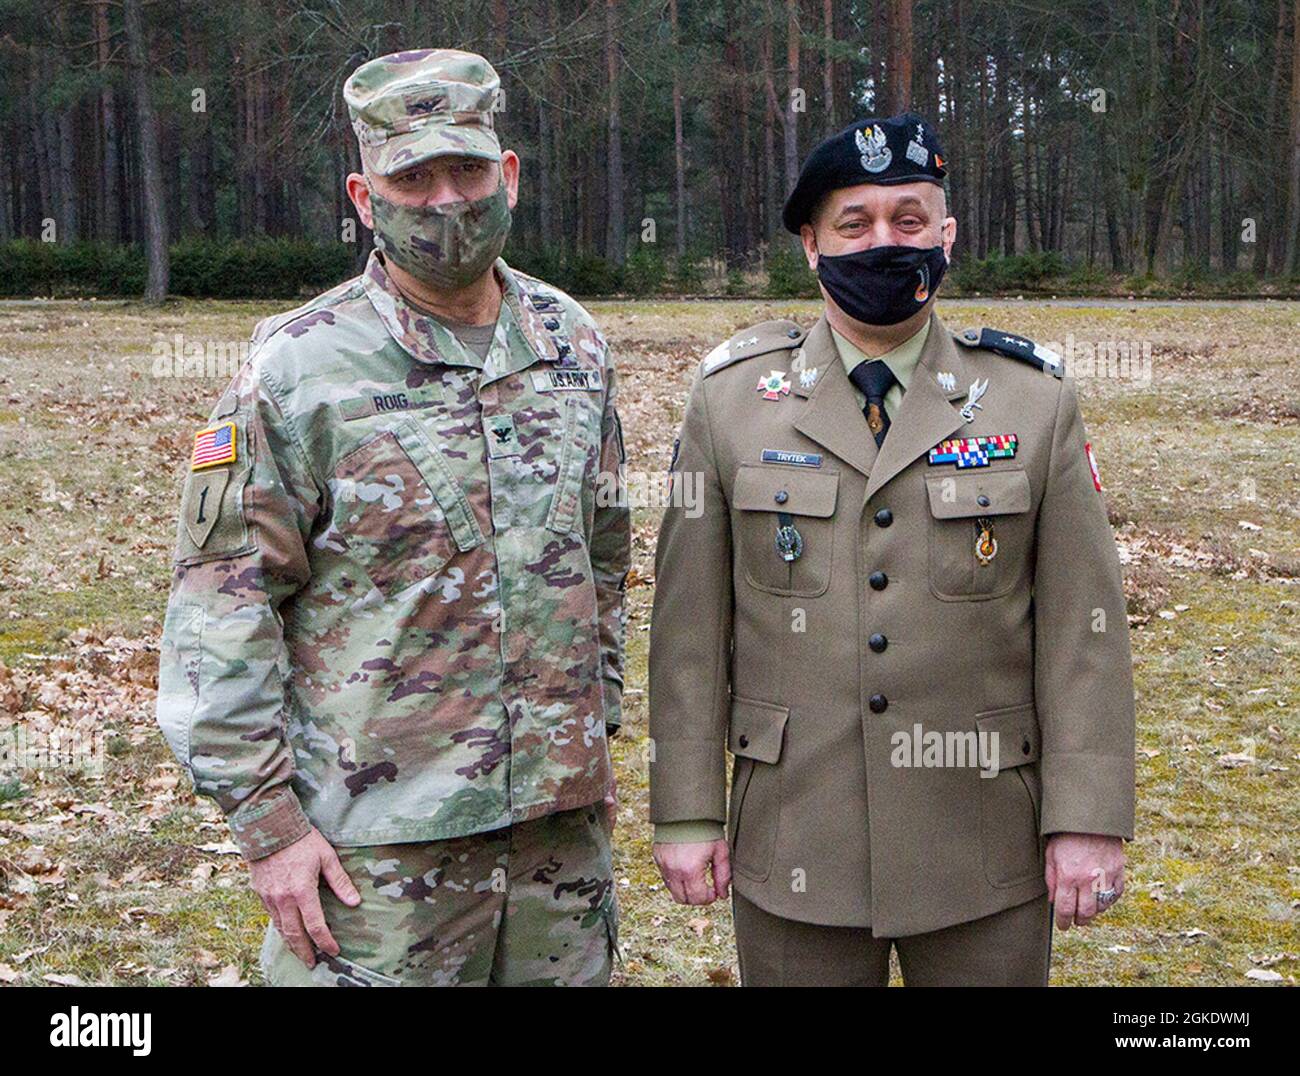 U.S. Army Col. Ricardo Roig (left), 50th Regional Support Group (RSG) commander, meets with Polish army Maj. Gen. Piotr Trytek (right), 11th Armored Cavalry Division commander, during a remembrance ceremony in Zagan, Poland, on Mar. 24, 2021. The ceremony commemorates the efforts of Allied service members who participated in the “Great Escape” from Stalag Luft III, a German prison-of-war camp, in March 1942. The 50th RSG, a Florida Guard unit based in Homestead, Florida, is deployed to Poland to support the European Deterrence Initiative as part of Operation Atlantic Resolve by providing manag Stock Photo